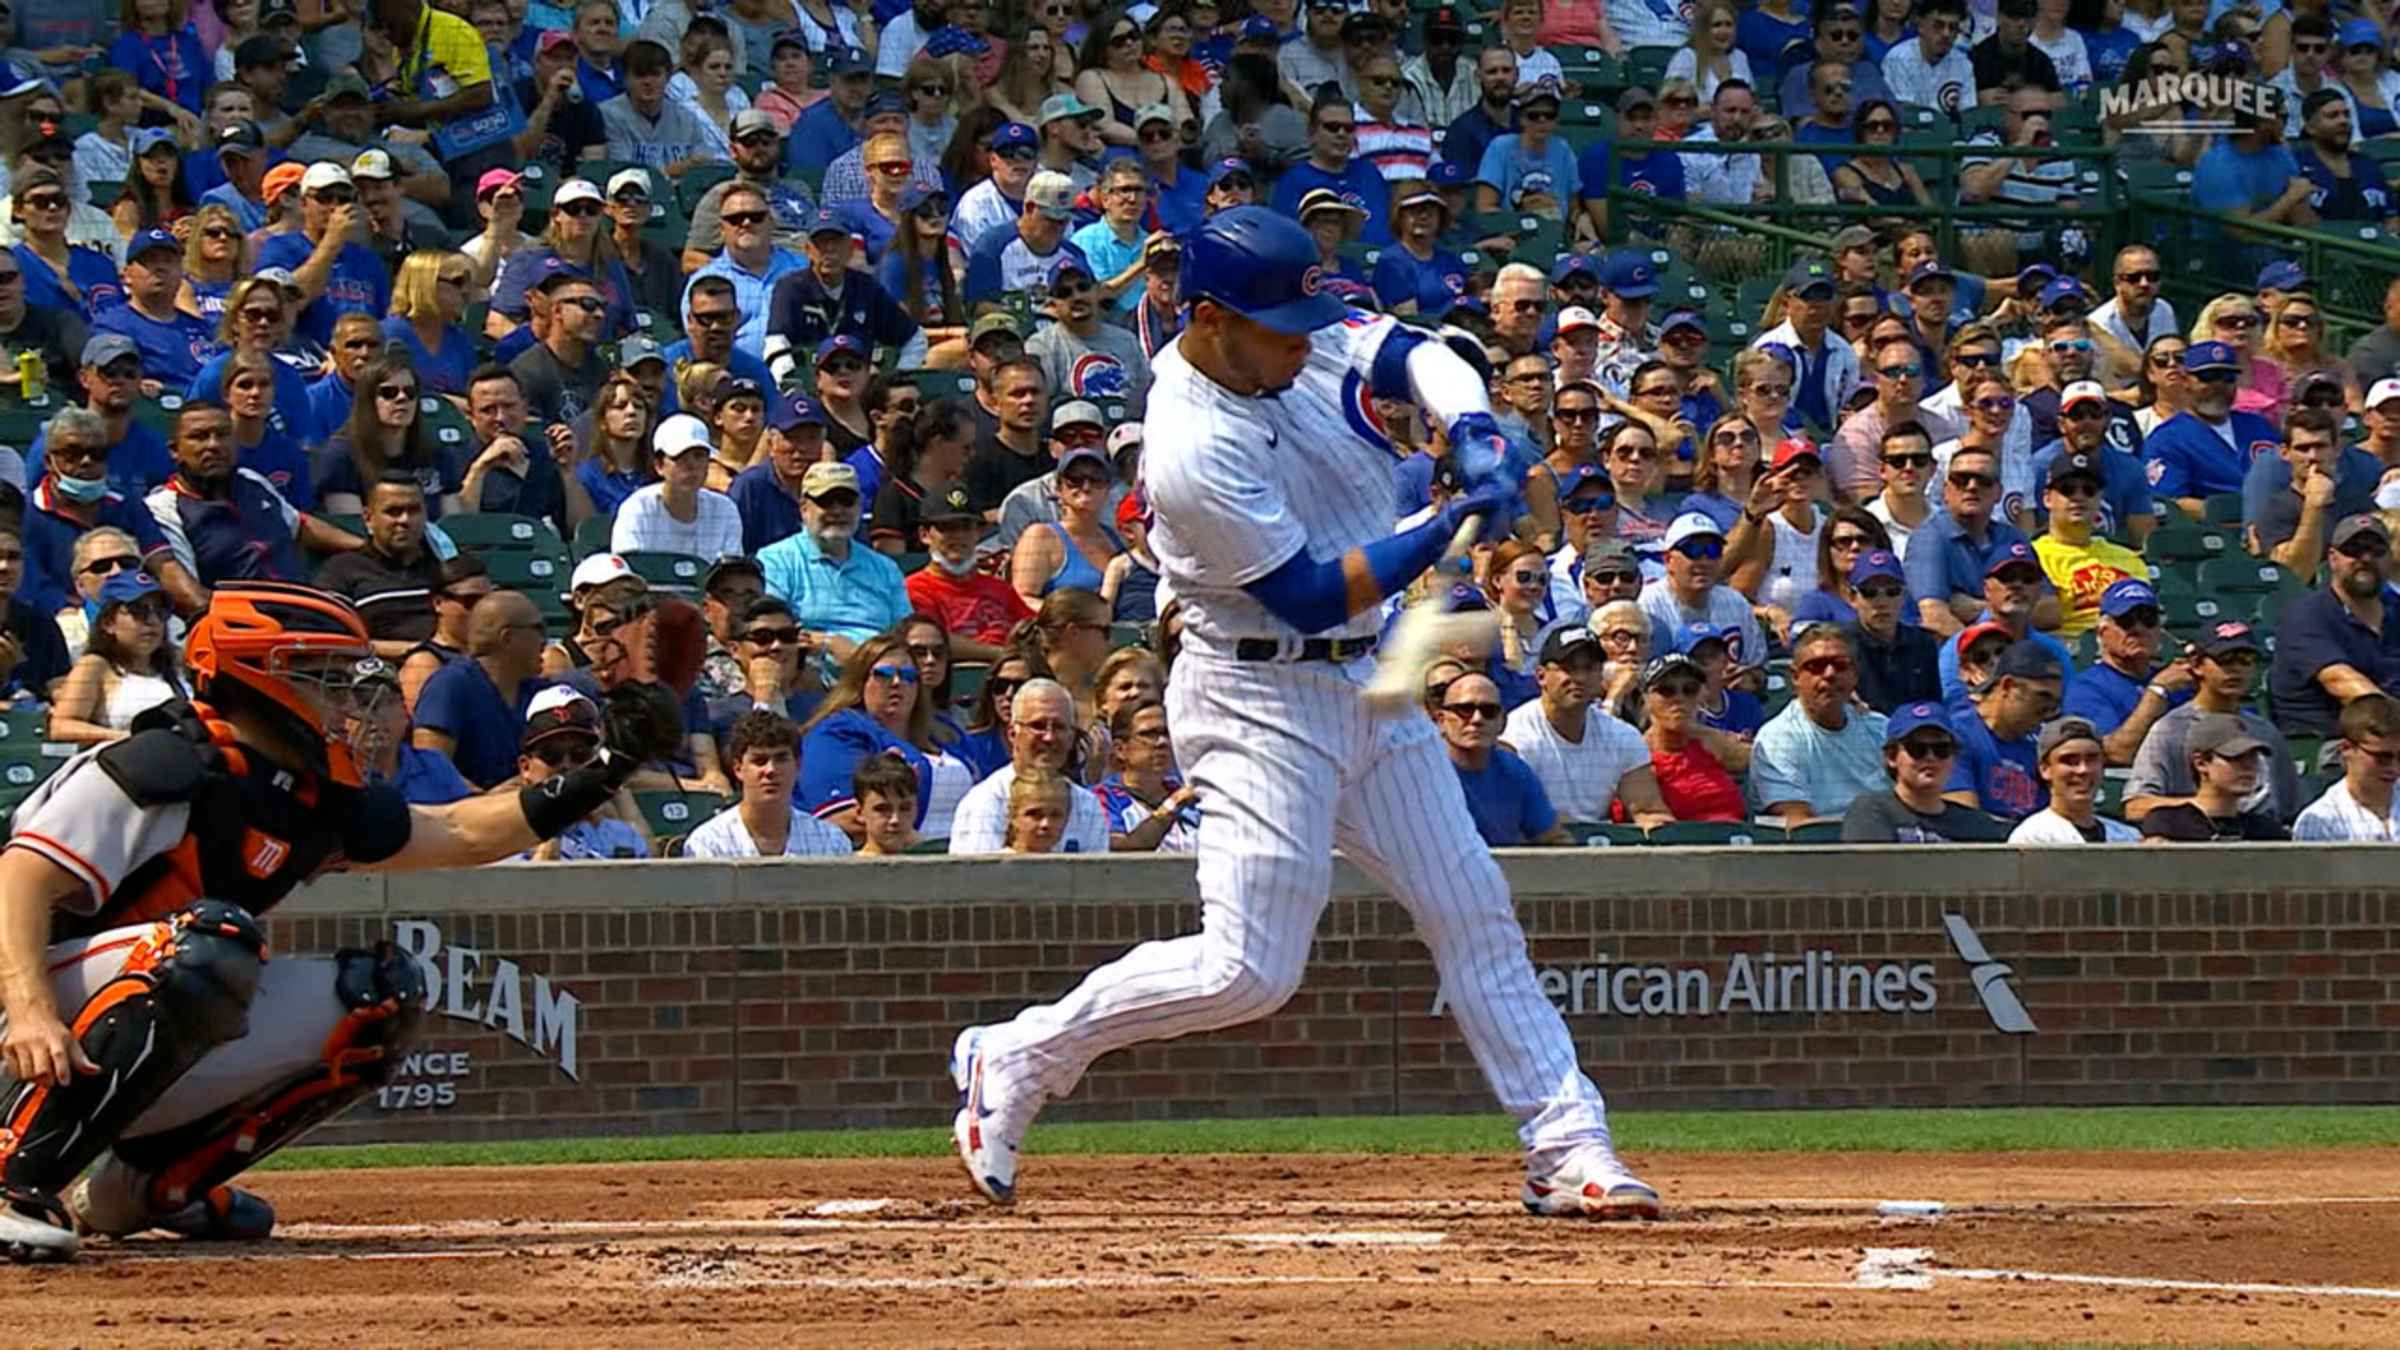 4,000 Willson contreras Stock Pictures, Editorial Images and Stock Photos